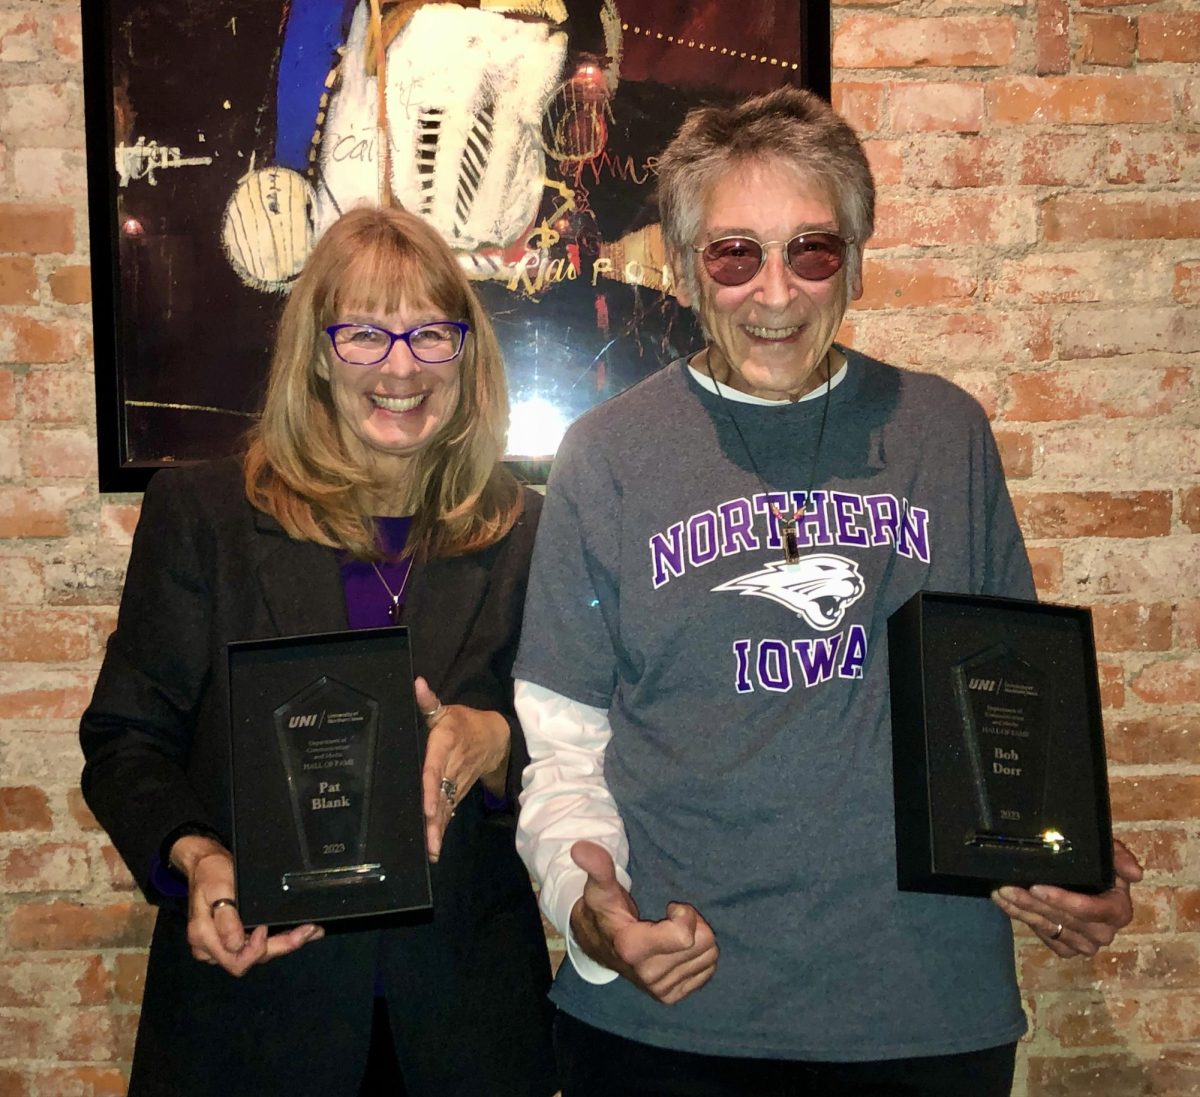 Blank+and+Dorr+pose+with+their+inductee+plaques.+Blank+had+a+43-year+long+broadcasting+career%2C+and+Dorr+had+over+50+years+of+experience+working+with+Iowa+Public+Radio.